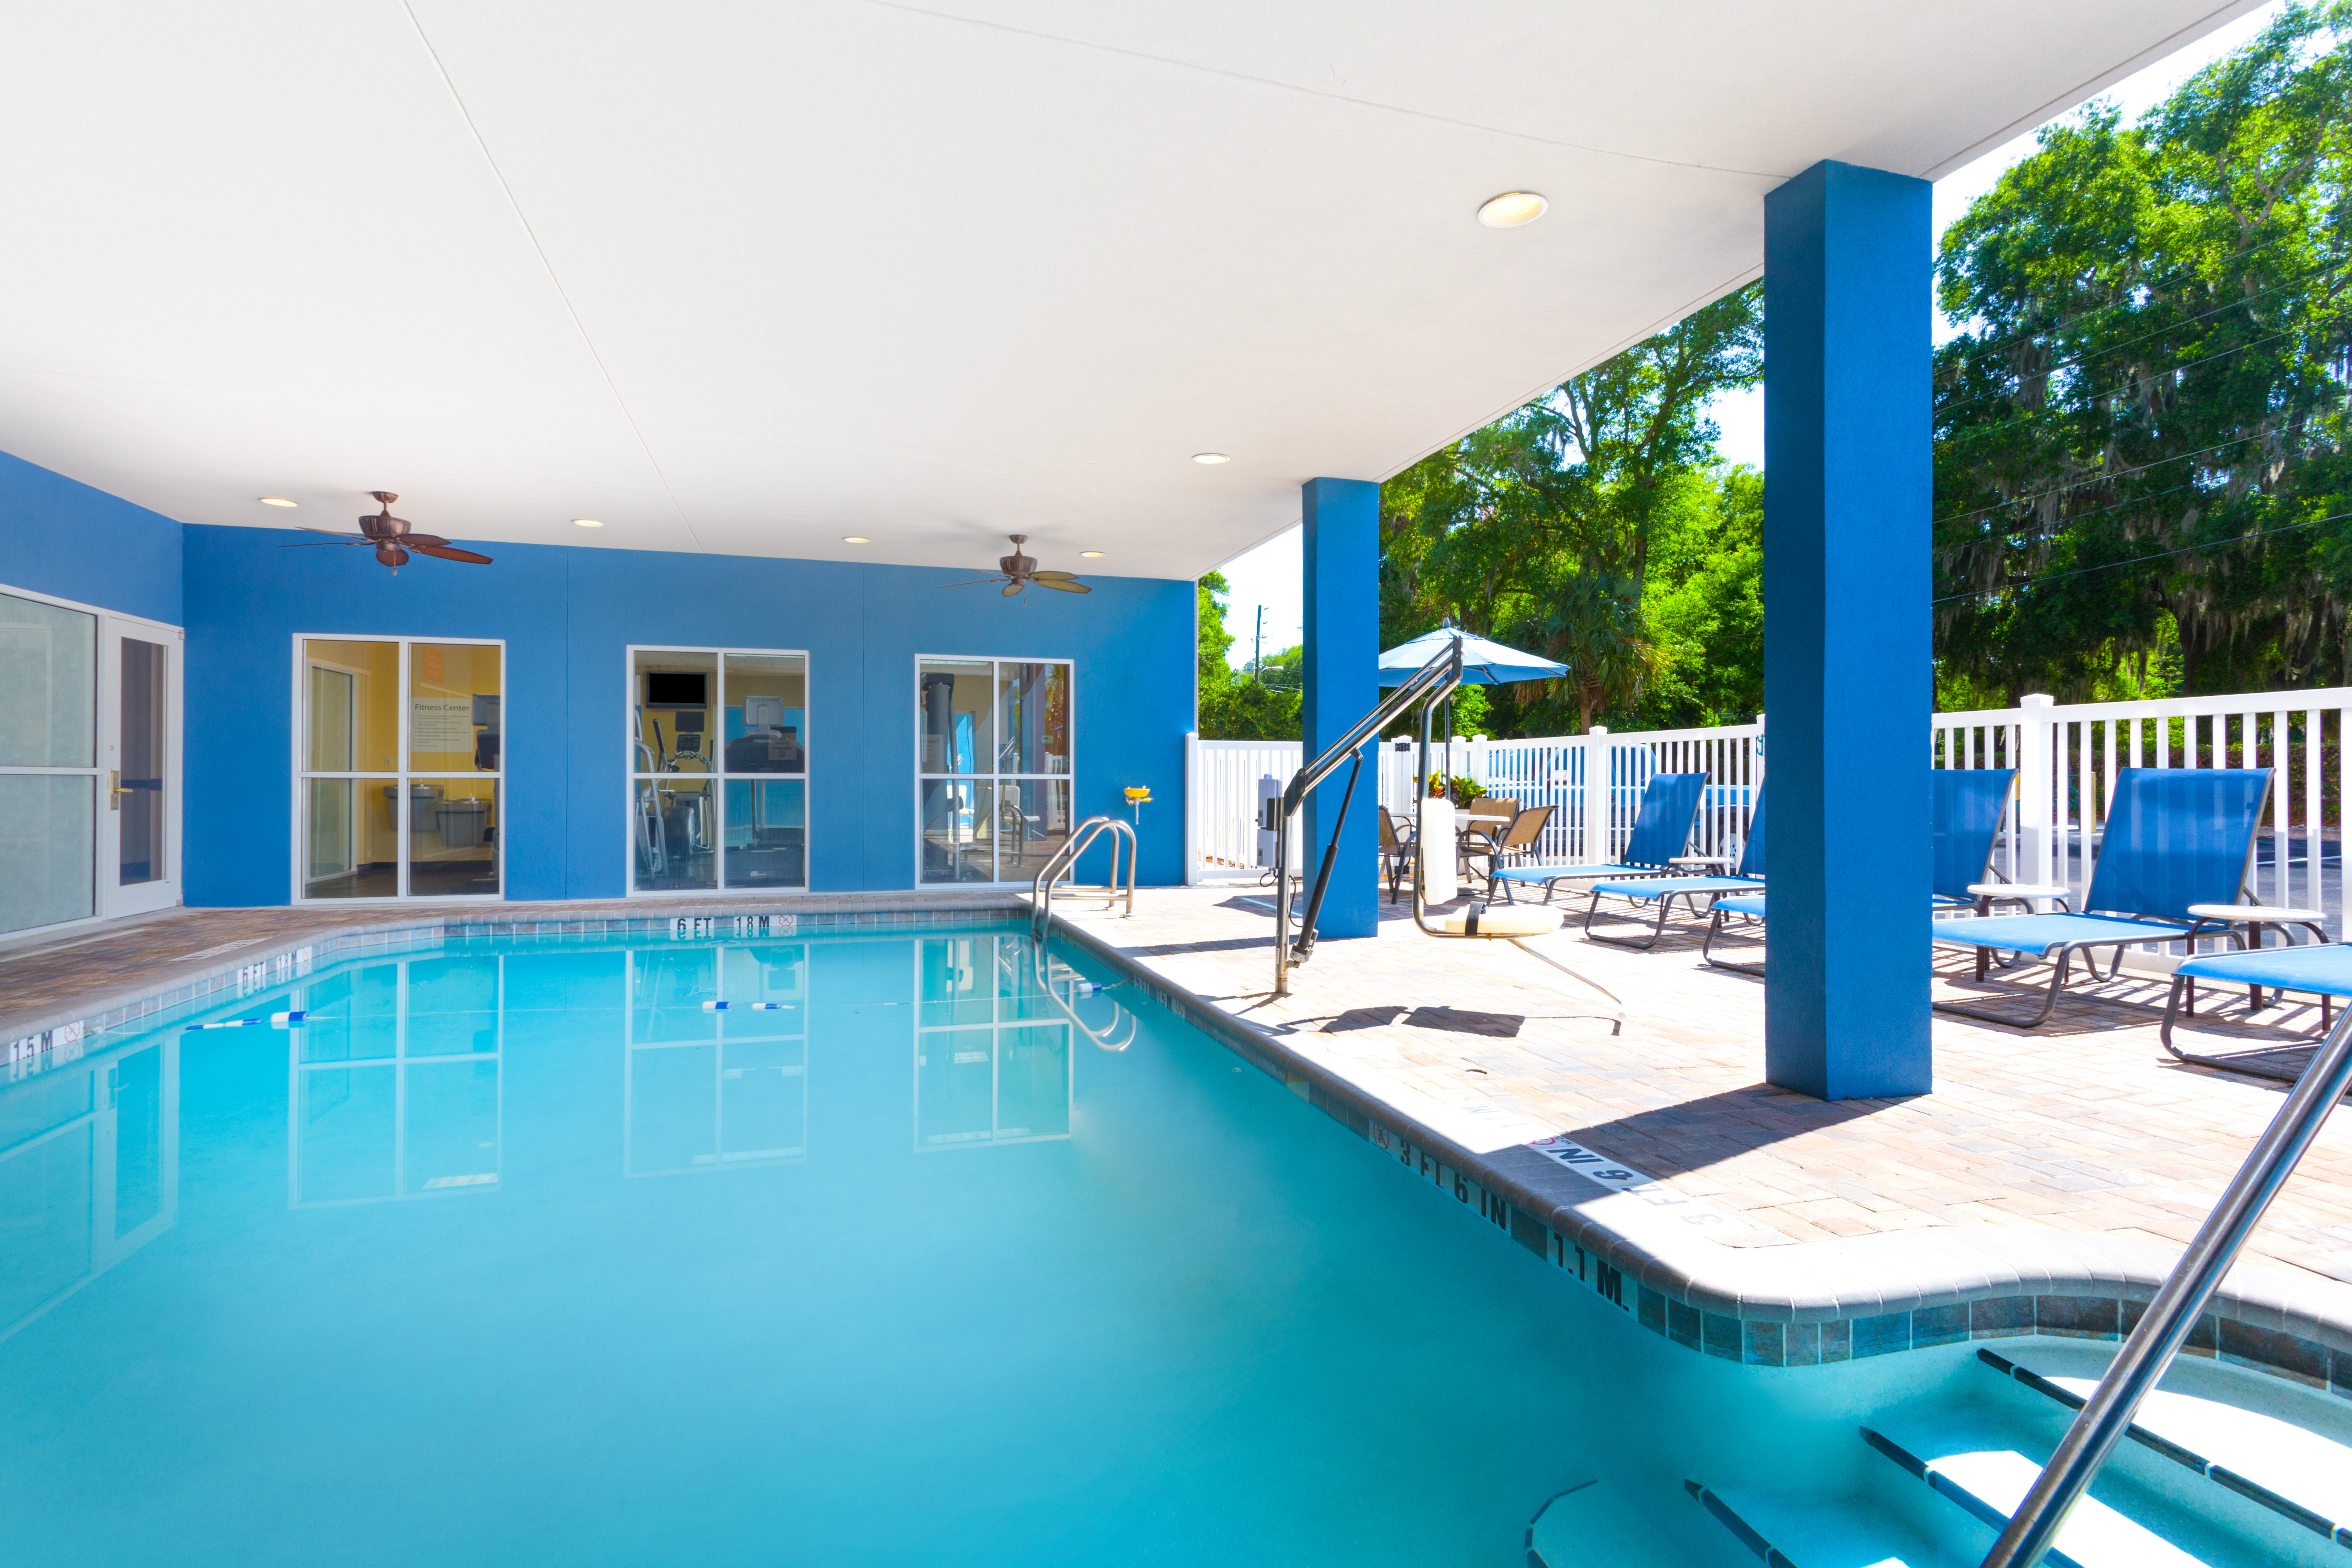 Our unique pool is covered and heated for all season swimming.